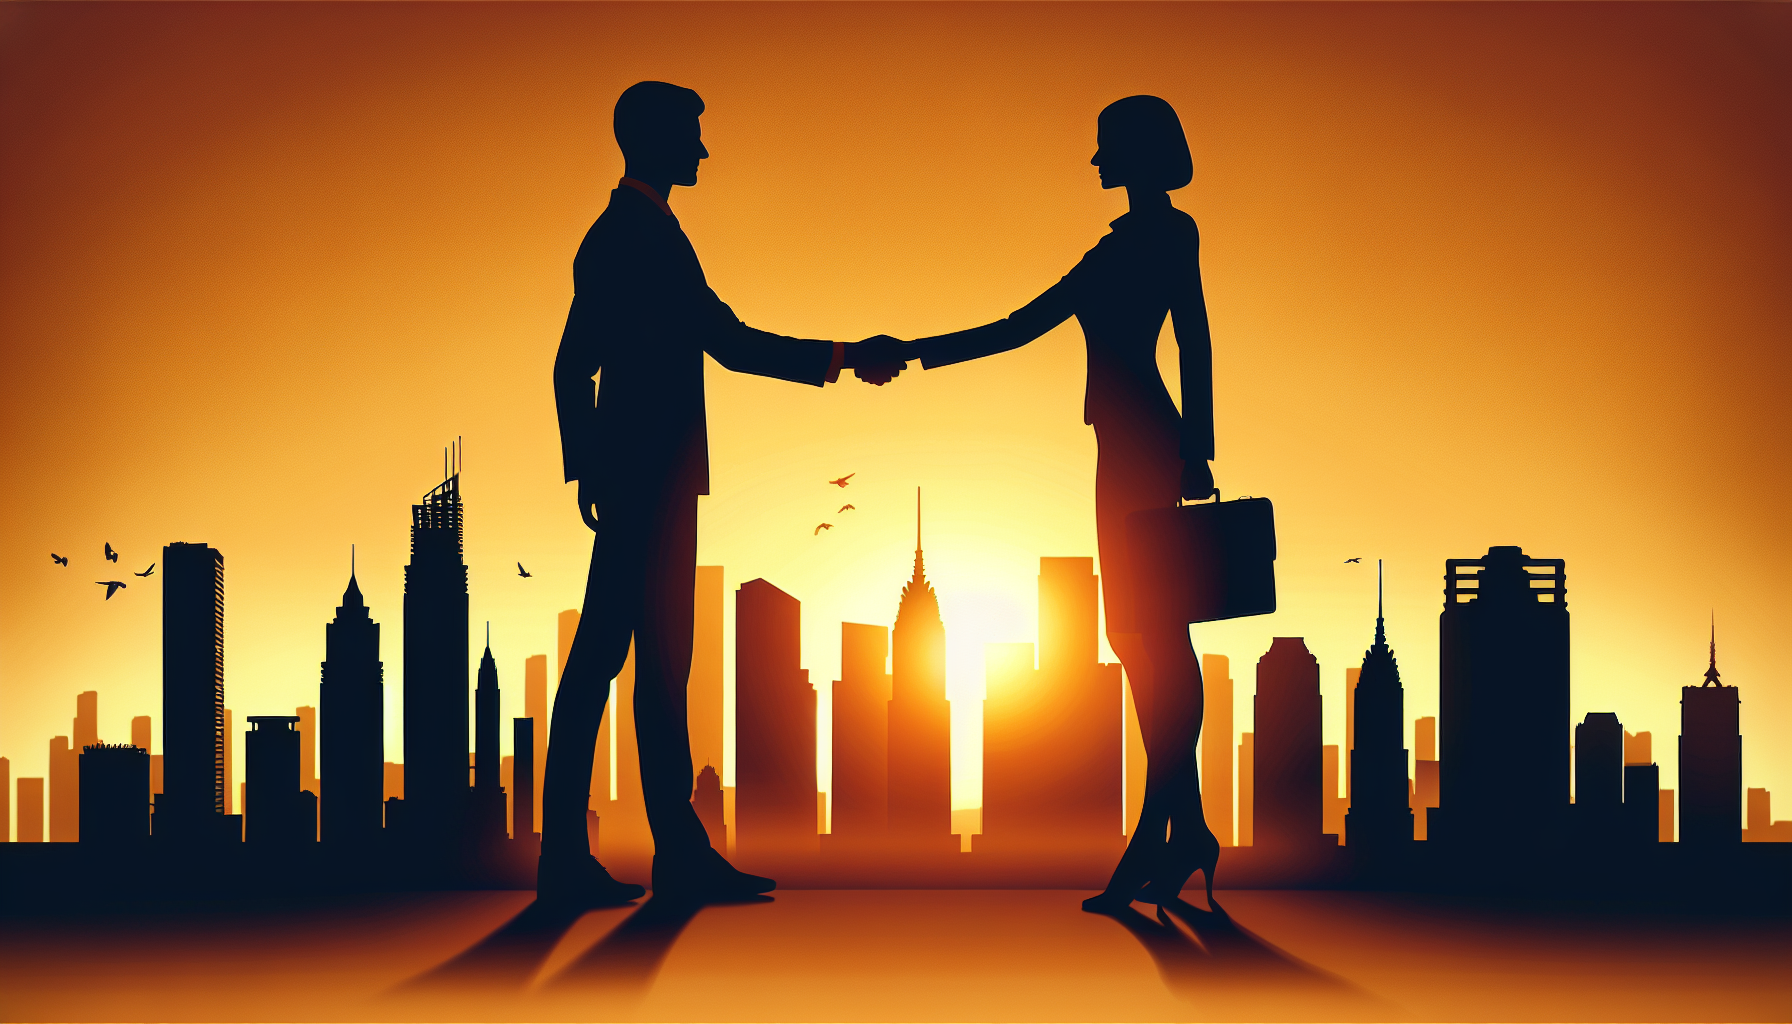 Illustration of a handshake between two business professionals